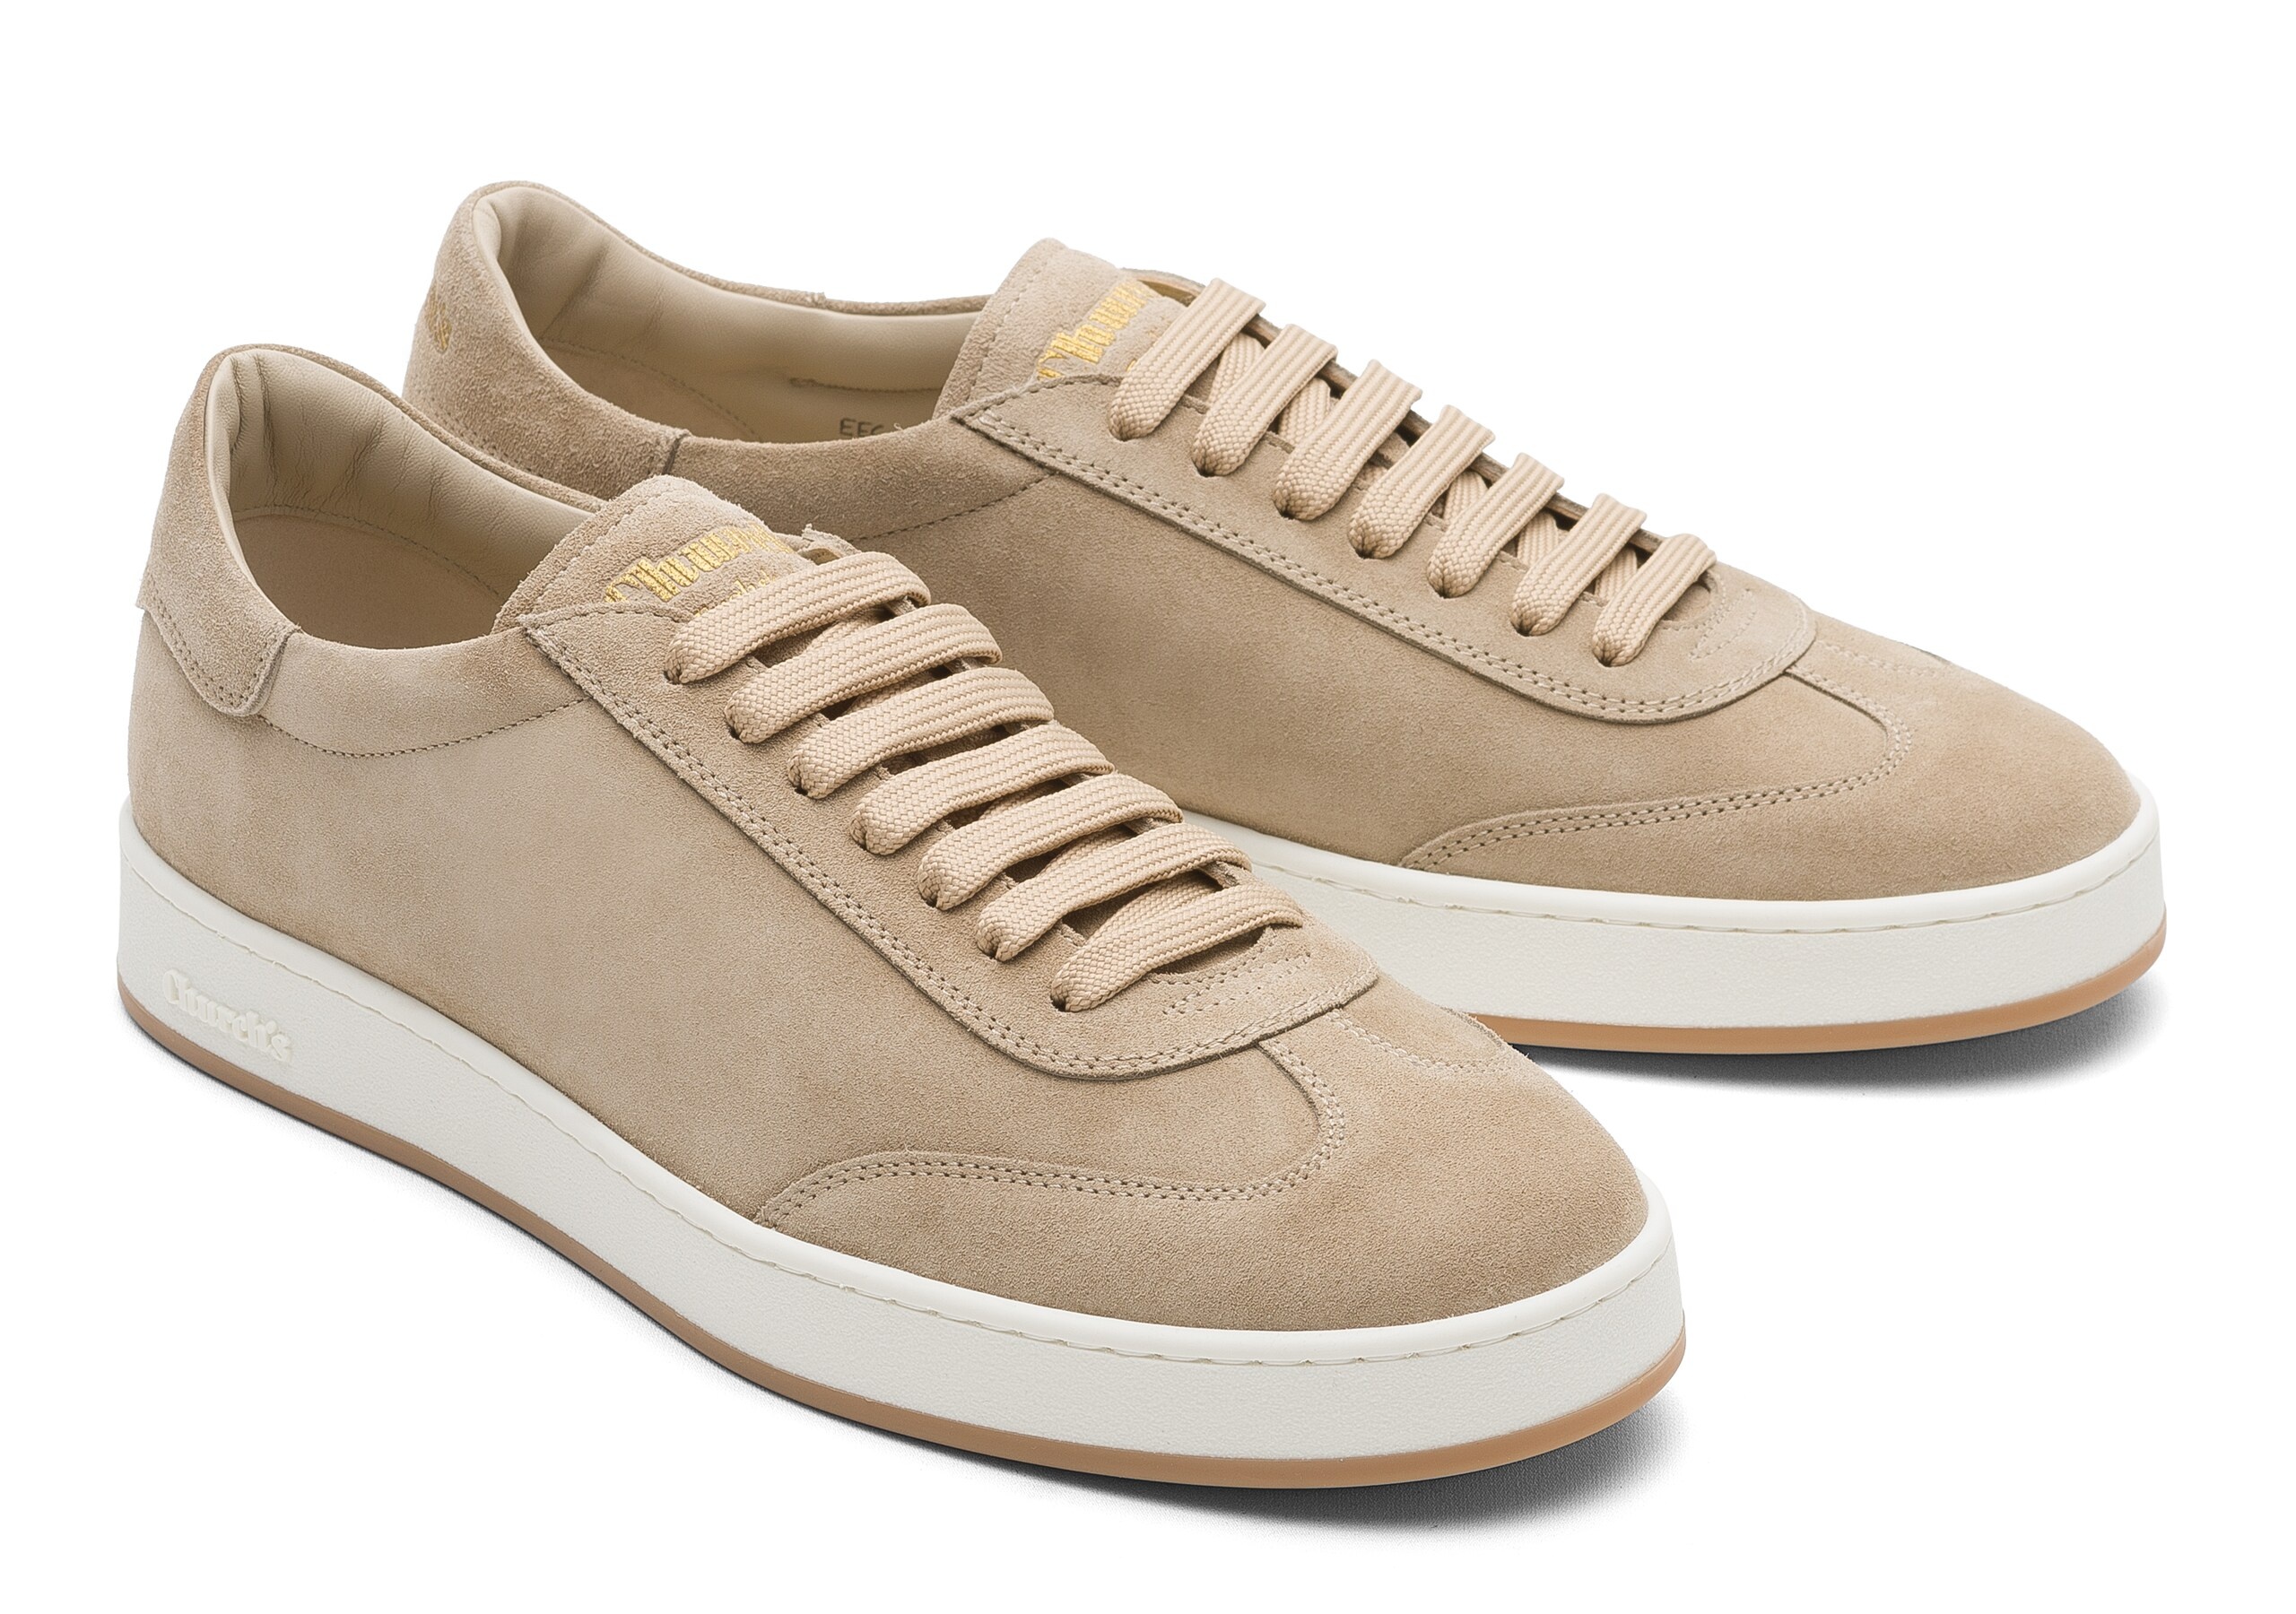 Largs 2
Soft Suede Sneaker Stone - 2